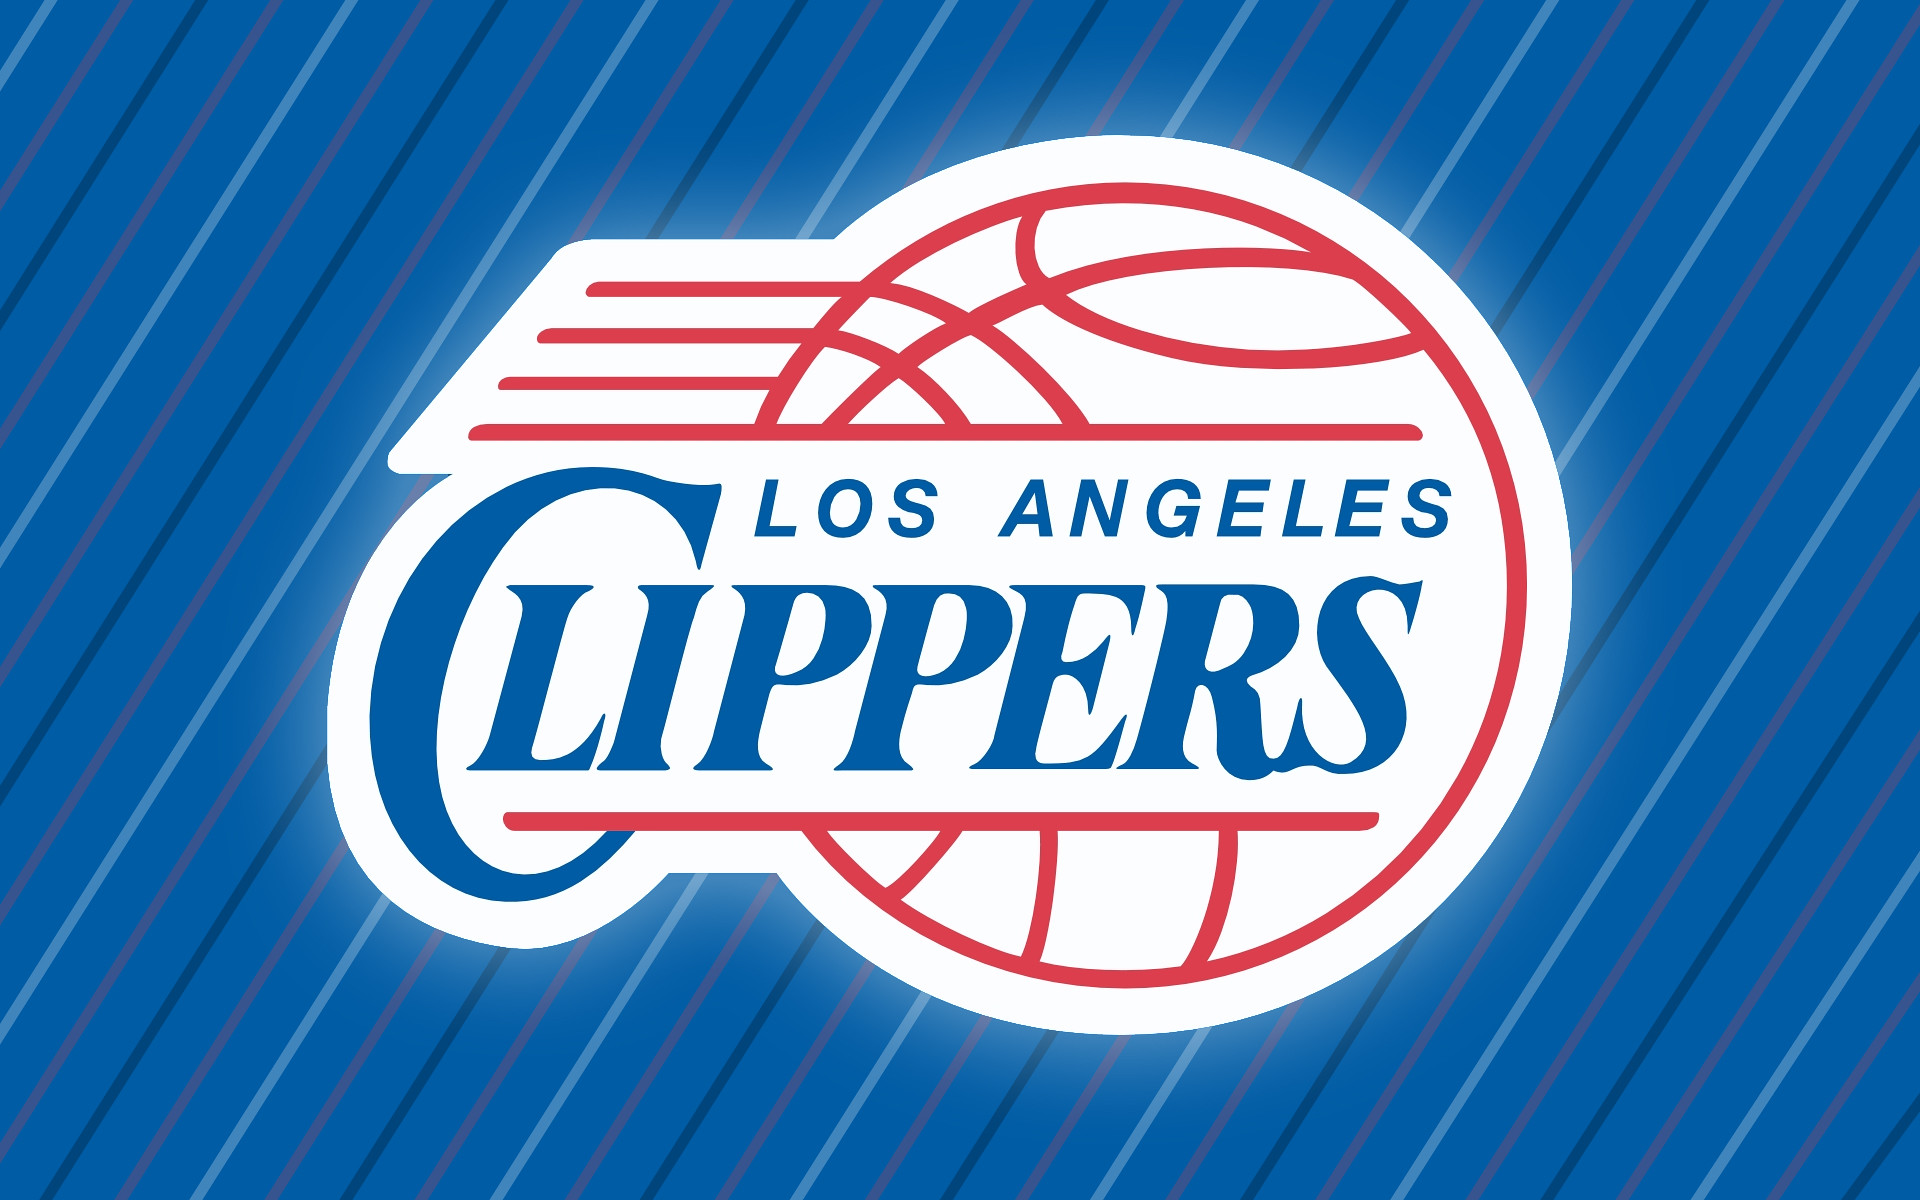 Los Angeles Clippers Tailgate